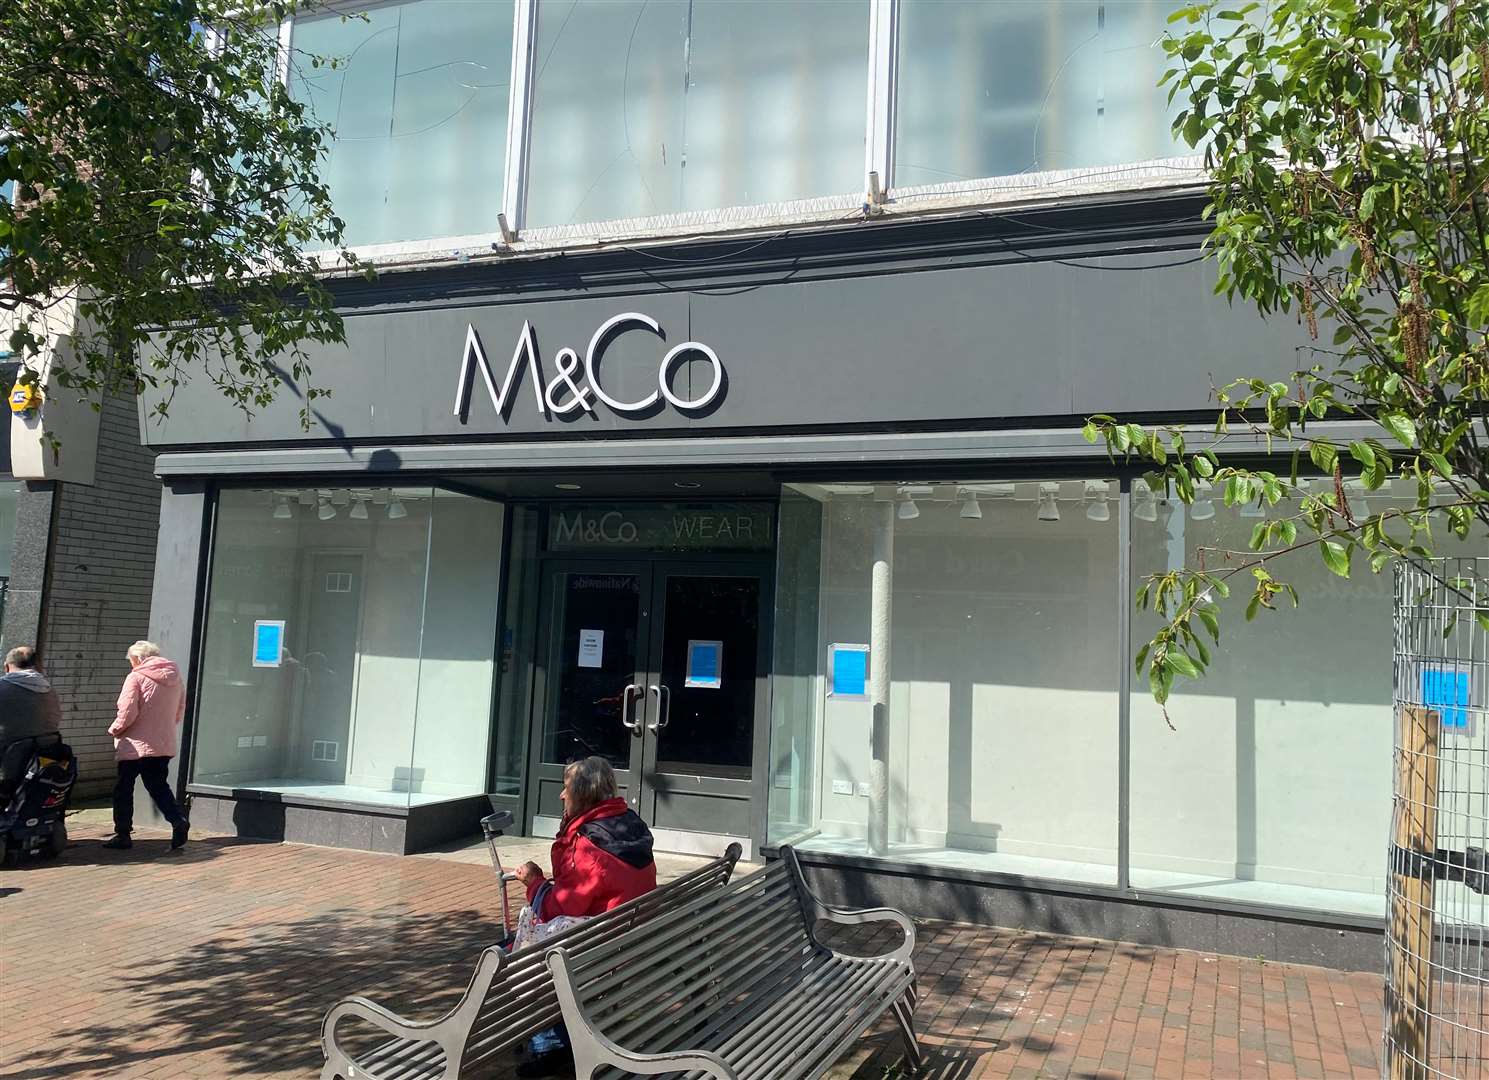 The former M&Co shop in Deal High Street has been taken over by Loungers